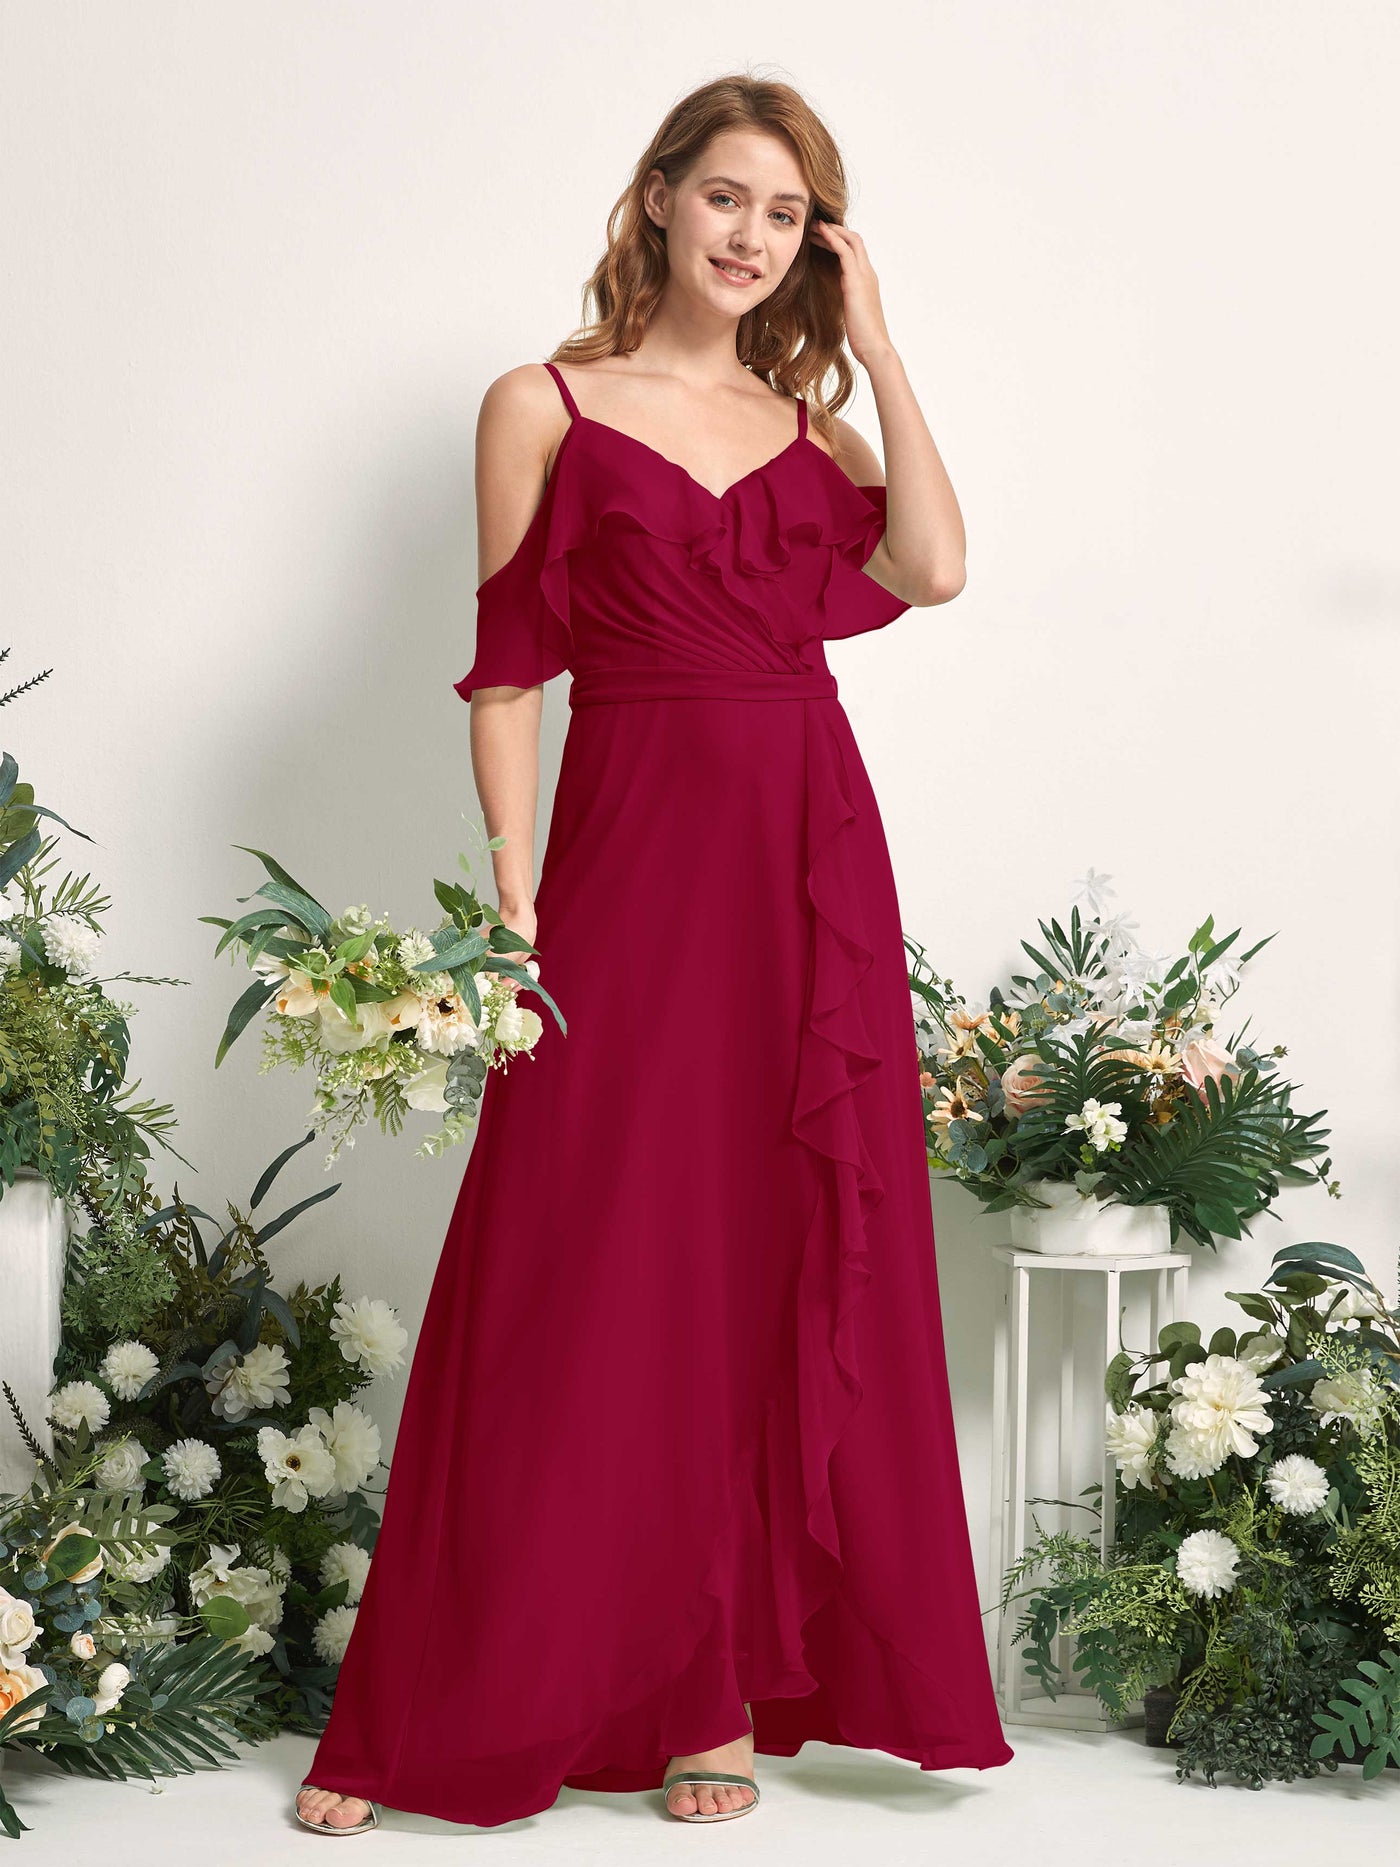 Bridesmaid Dress A-line Chiffon Spaghetti-straps Full Length Sleeveless Wedding Party Dress - Jester Red (81227441)#color_jester-red